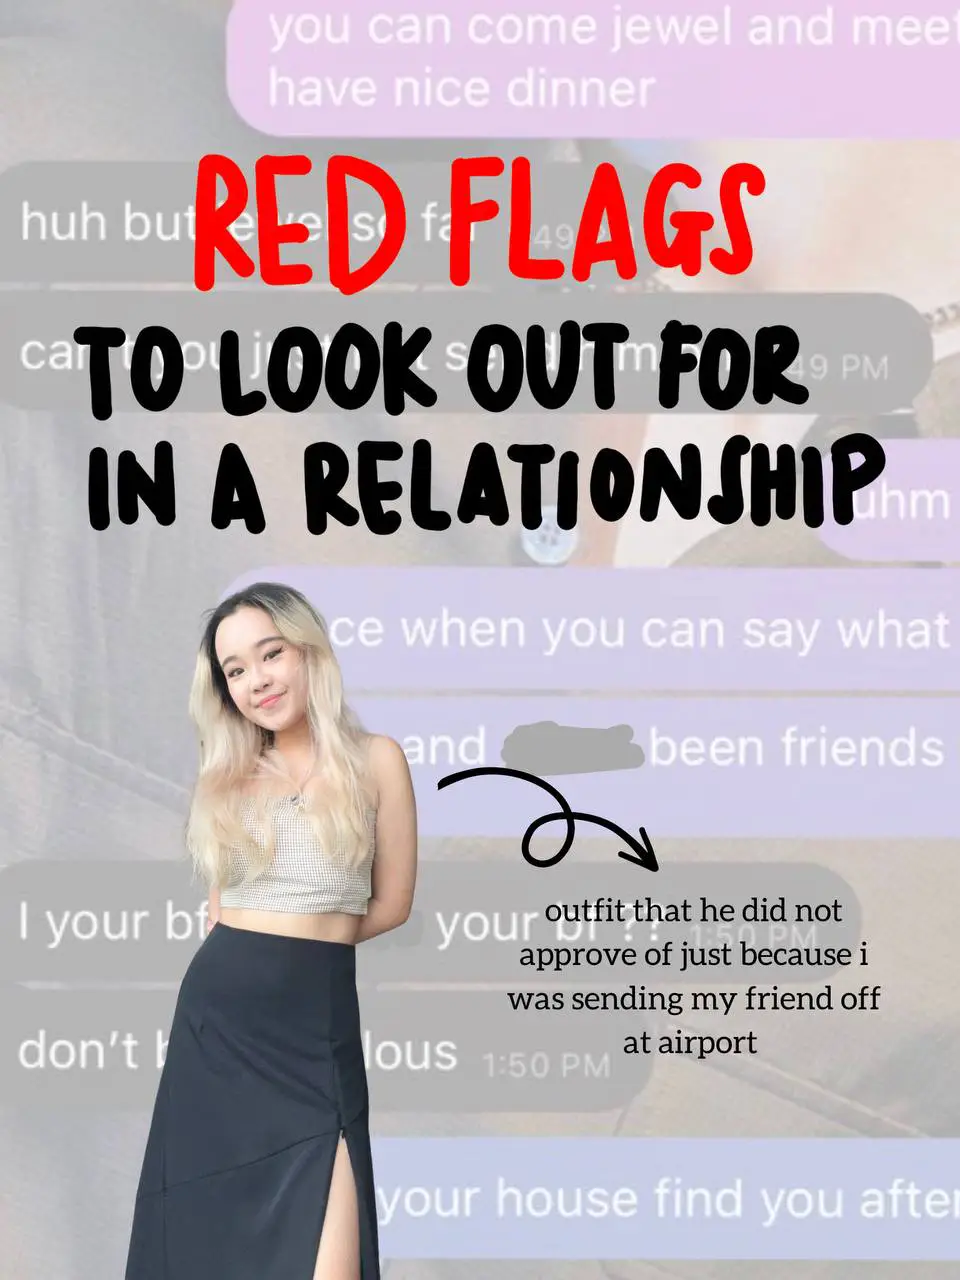 🚩RED FLAGS🚩 i ignored with my ex…'s images(0)